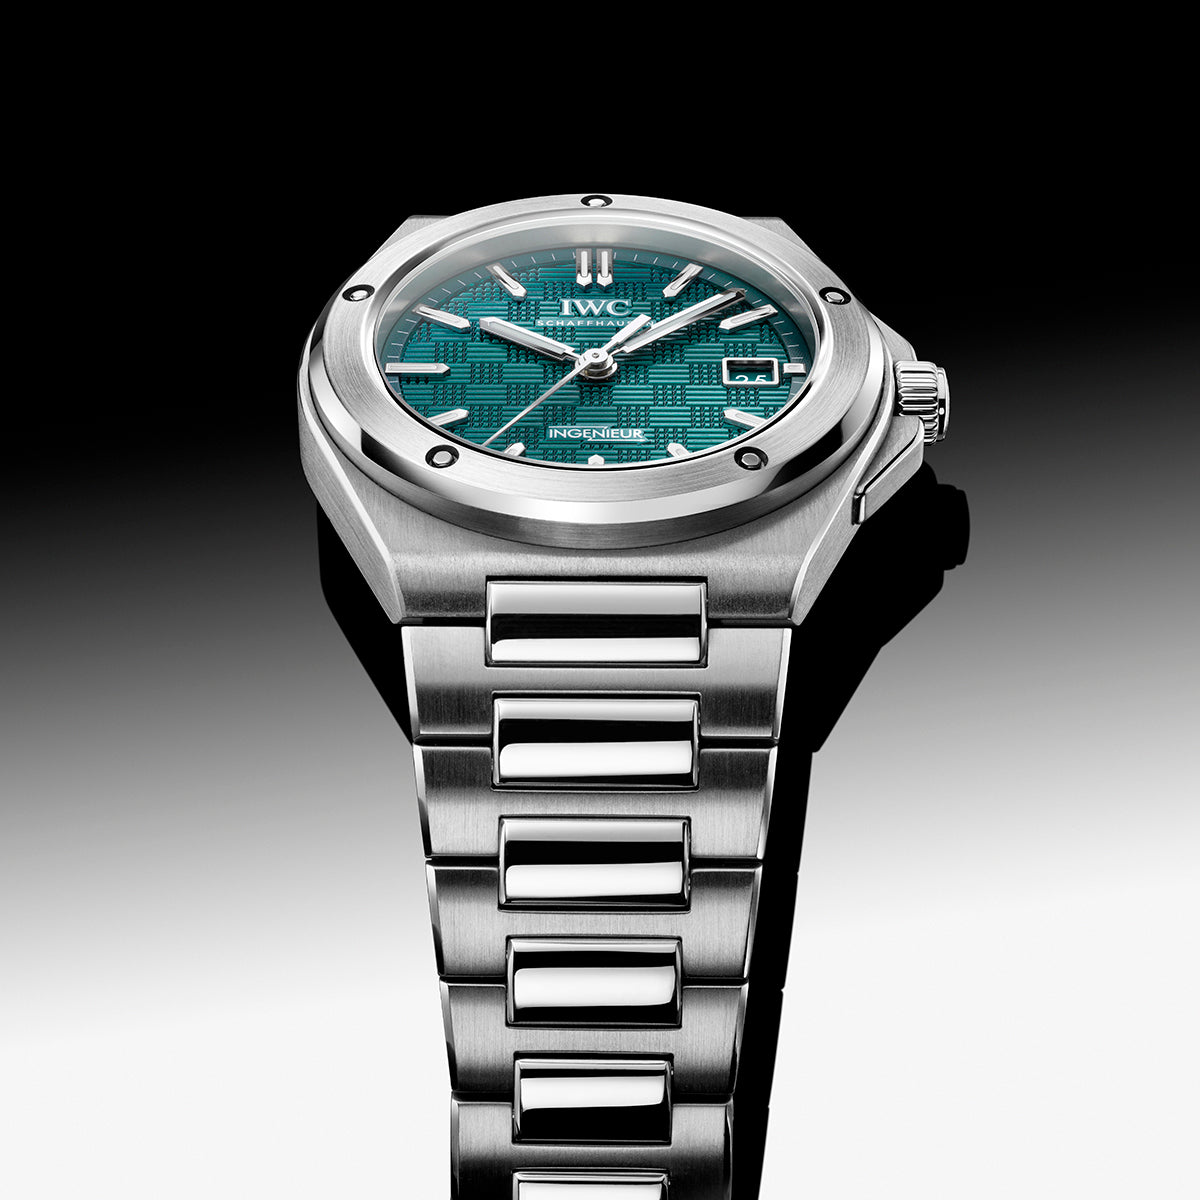 IWC Ingenieur Automatic Green Dial